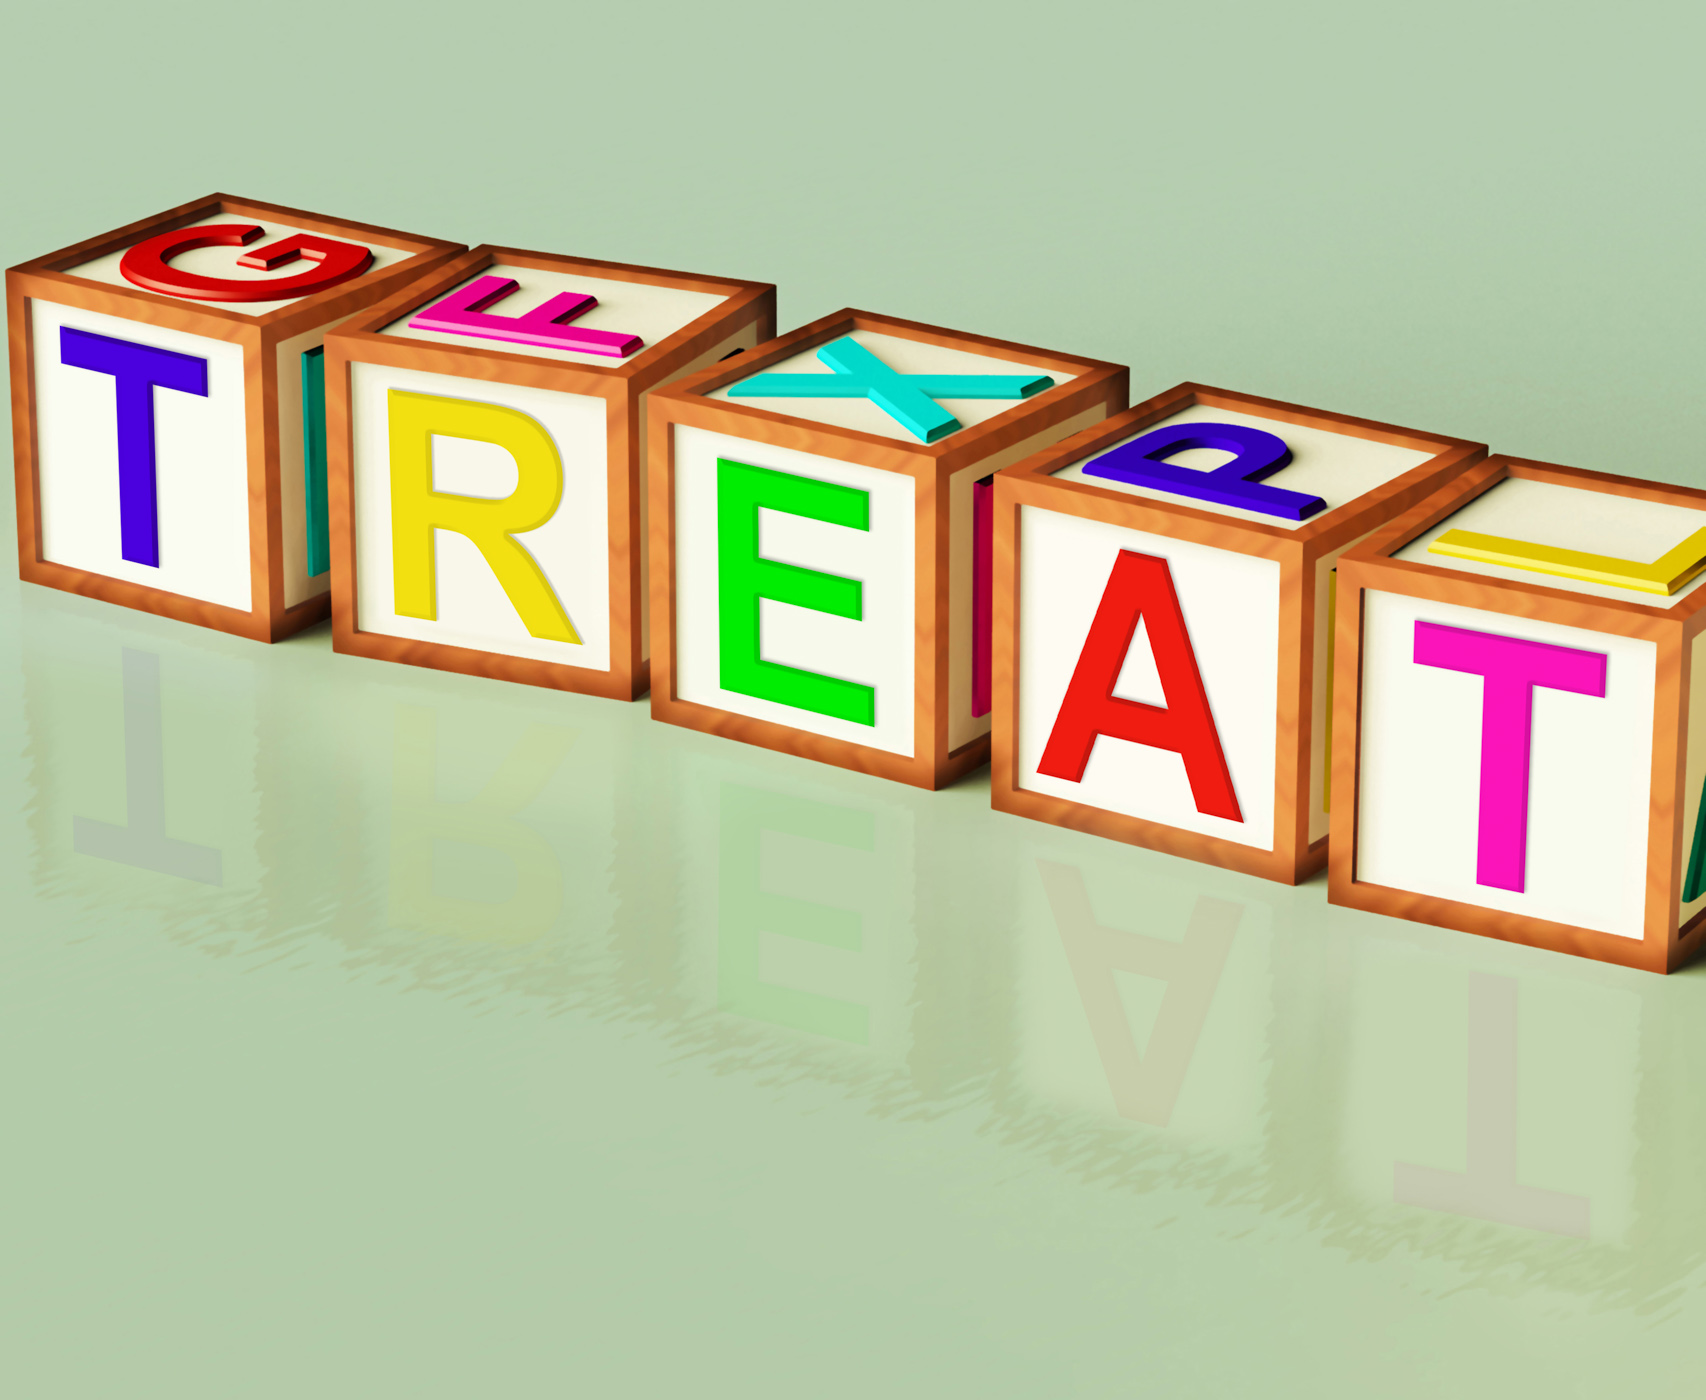 Treat blocks mean special occurrence or gift photo